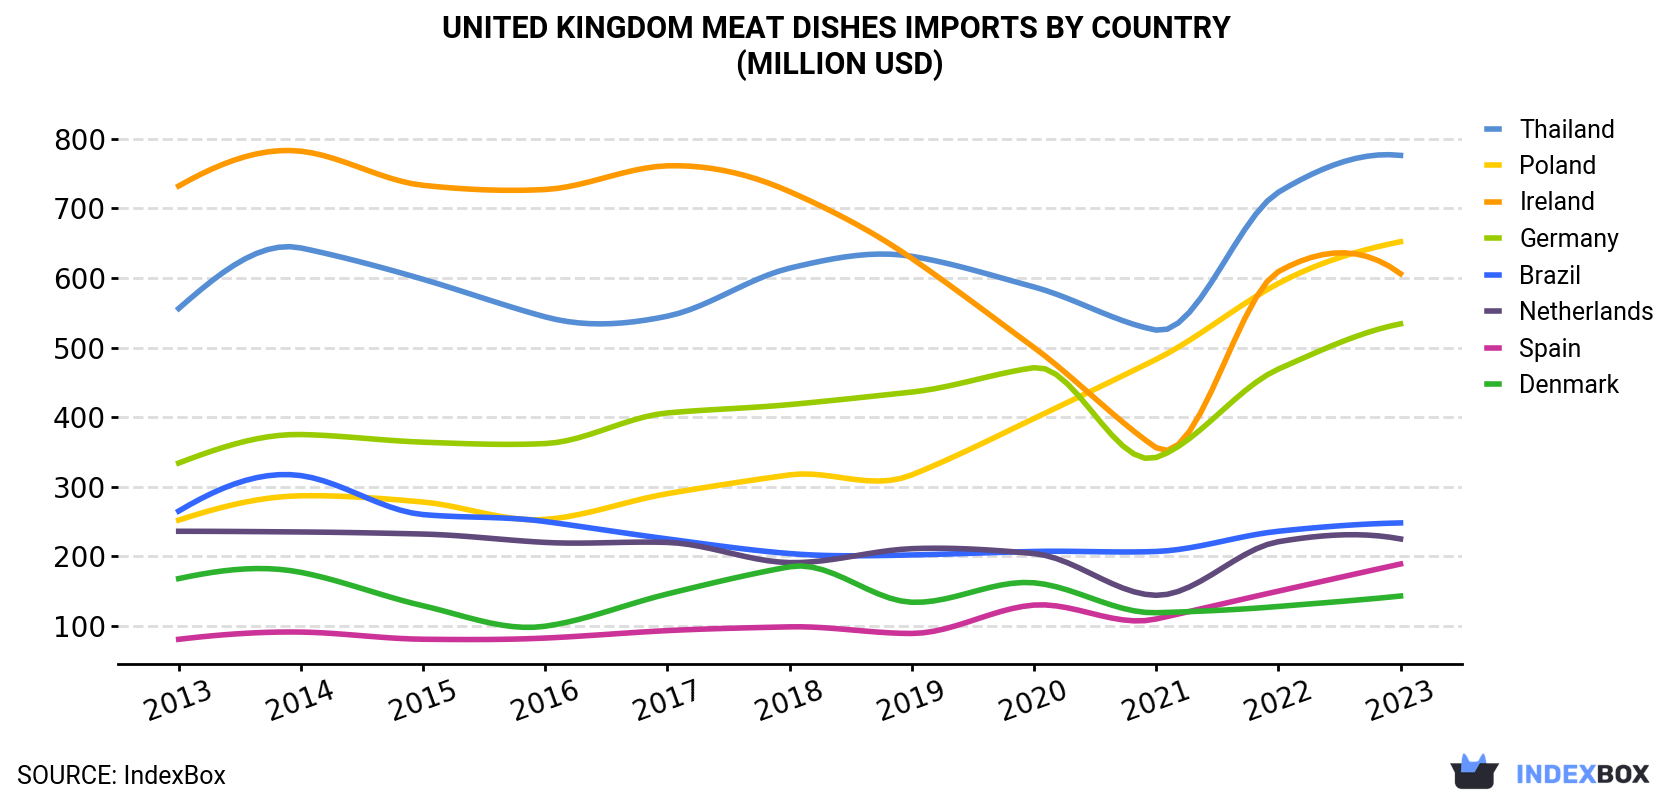 United Kingdom Meat Dishes Imports By Country (Million USD)